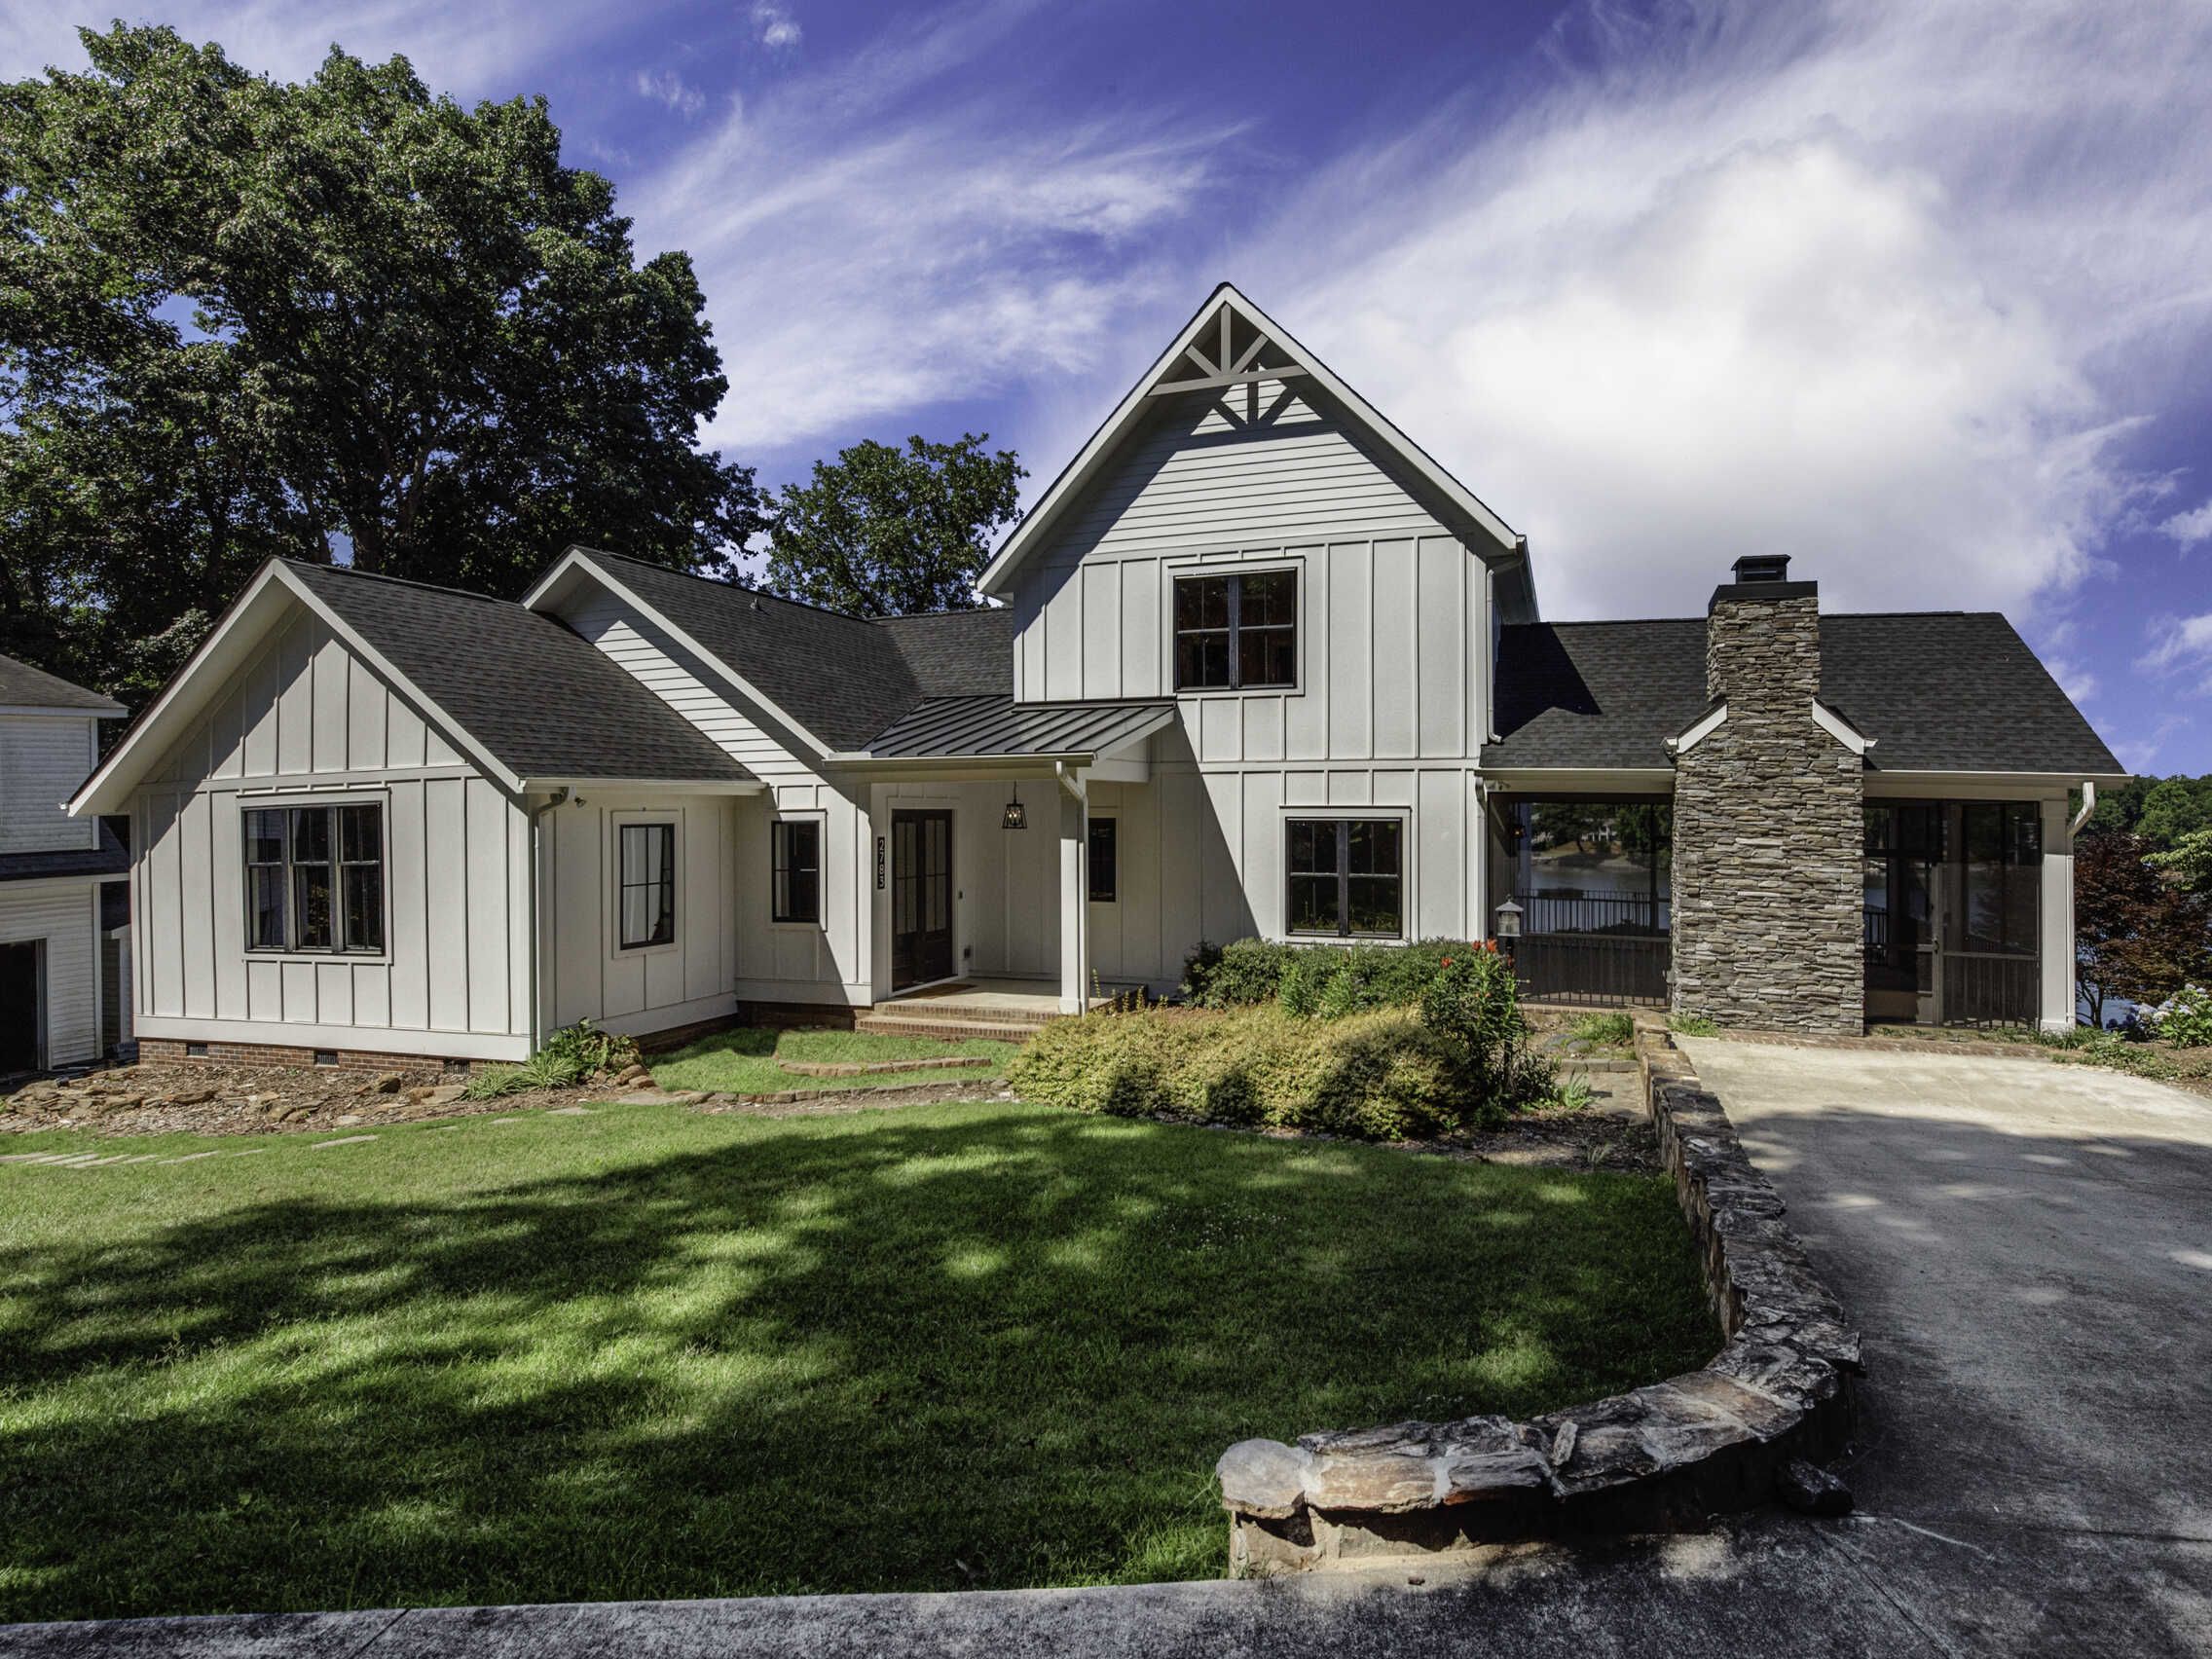 Taking Homes In Charlotte To Another Level | Paul Kowalski Builders